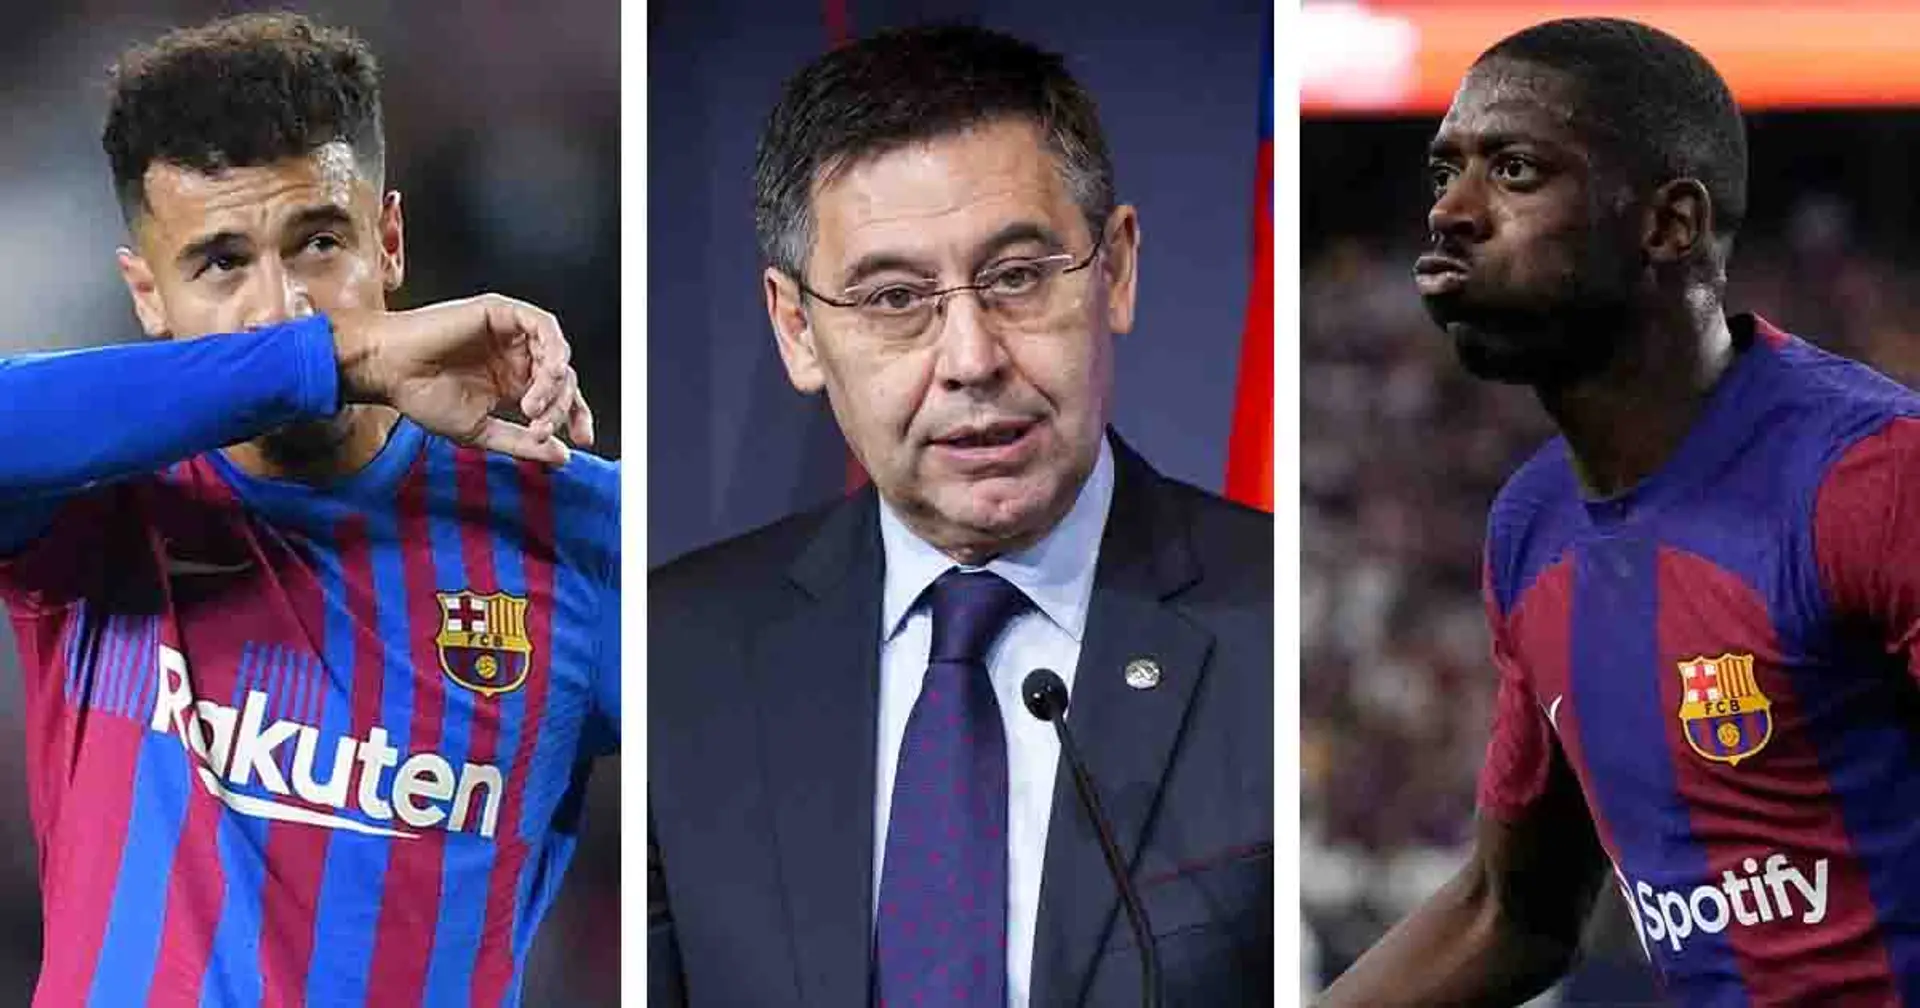 'This is Bartomeu's legacy': fan unleashes rant on Barca's transfer policy after cheap Dembele sale